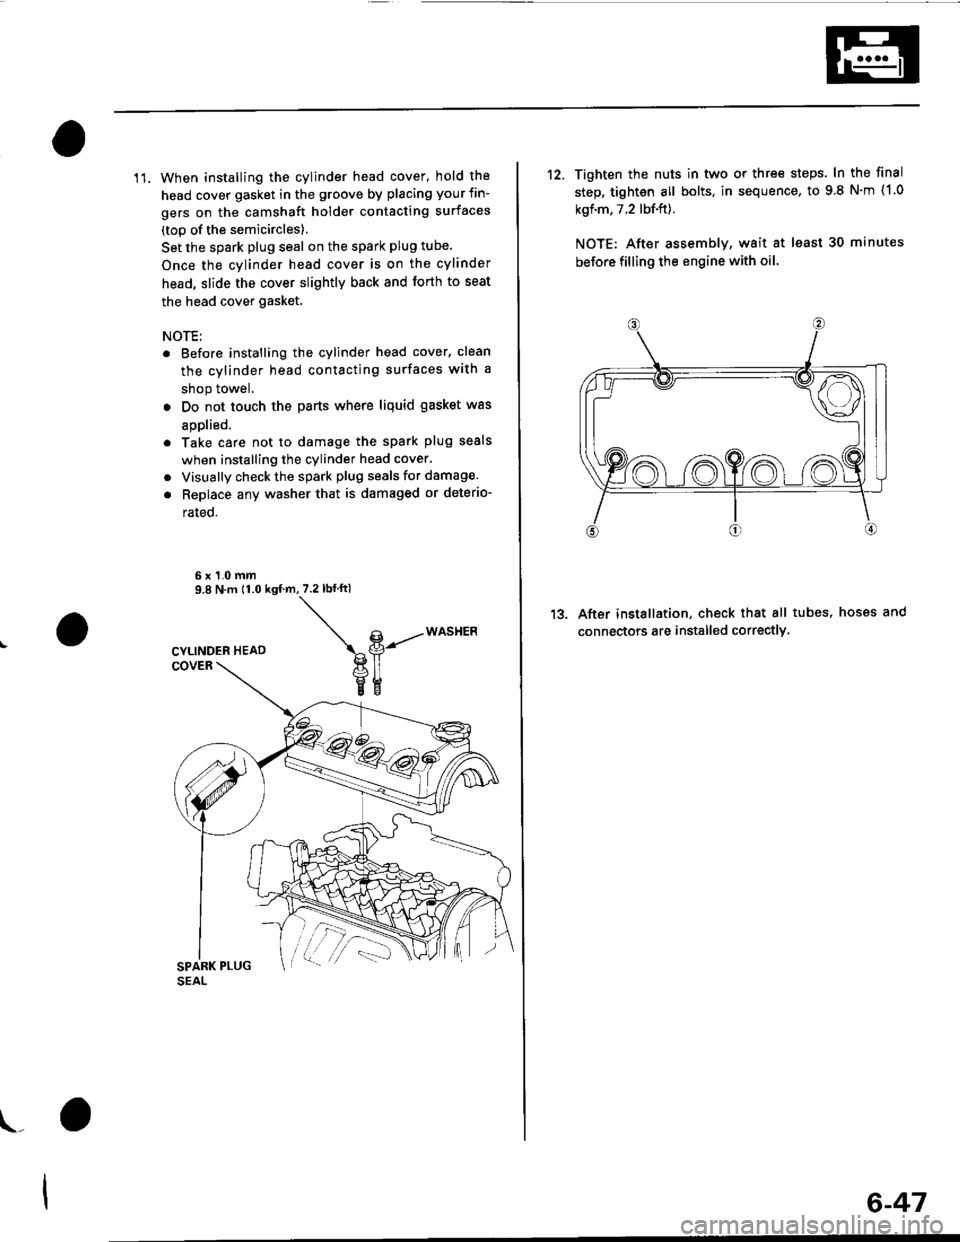 HONDA CIVIC 1999 6.G Owners Guide 11. When installing the cylinder head cover, hold the
head cover gasket in the groove by placing your fin-
gers on the camshaft holder contacting surfaces
(top of the semicircles)
Set the spark plug s